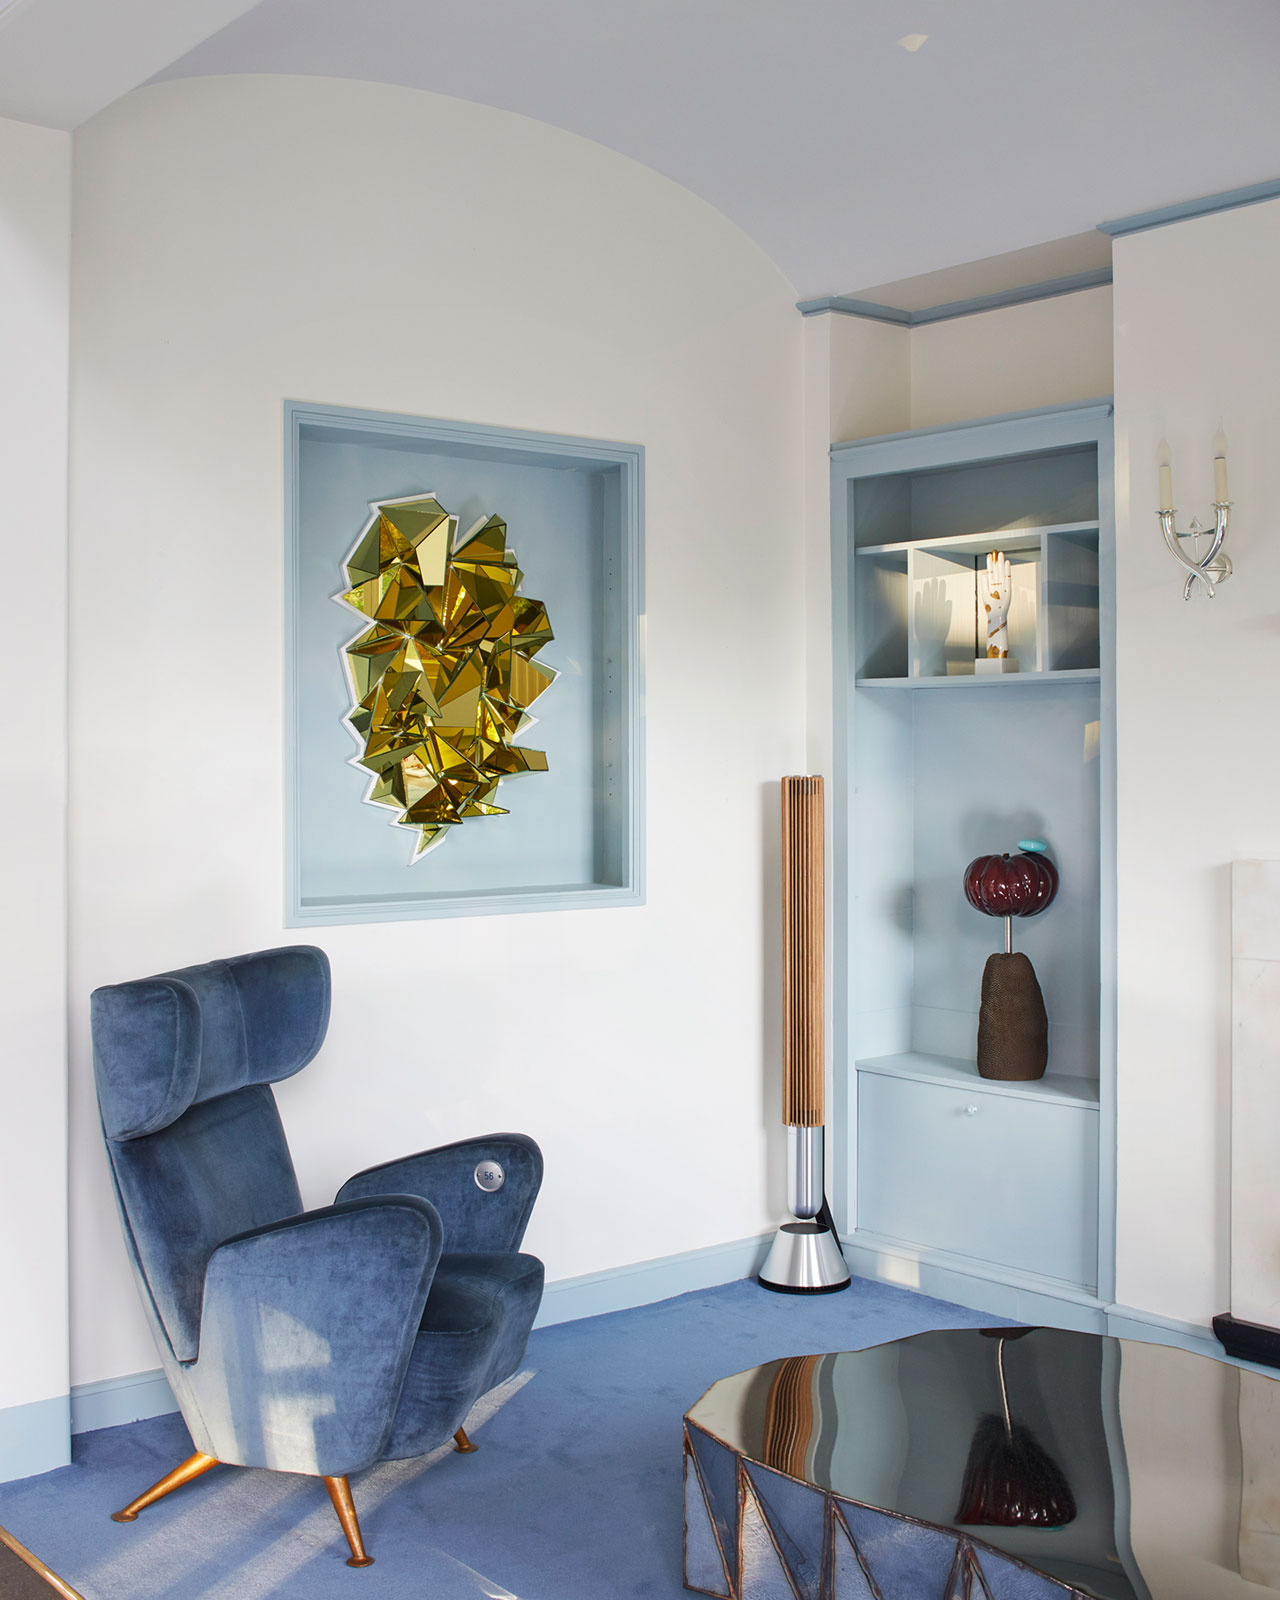 Armchair by Gio Ponti; "Sans90degrés" wall-mounted sculpture by Mathias Kiss; Bang &amp; Olufsen speaker; "Woman with Fruit" bronze sculpture by Jonathan Trayte.
Photography © Jeremie Léon.